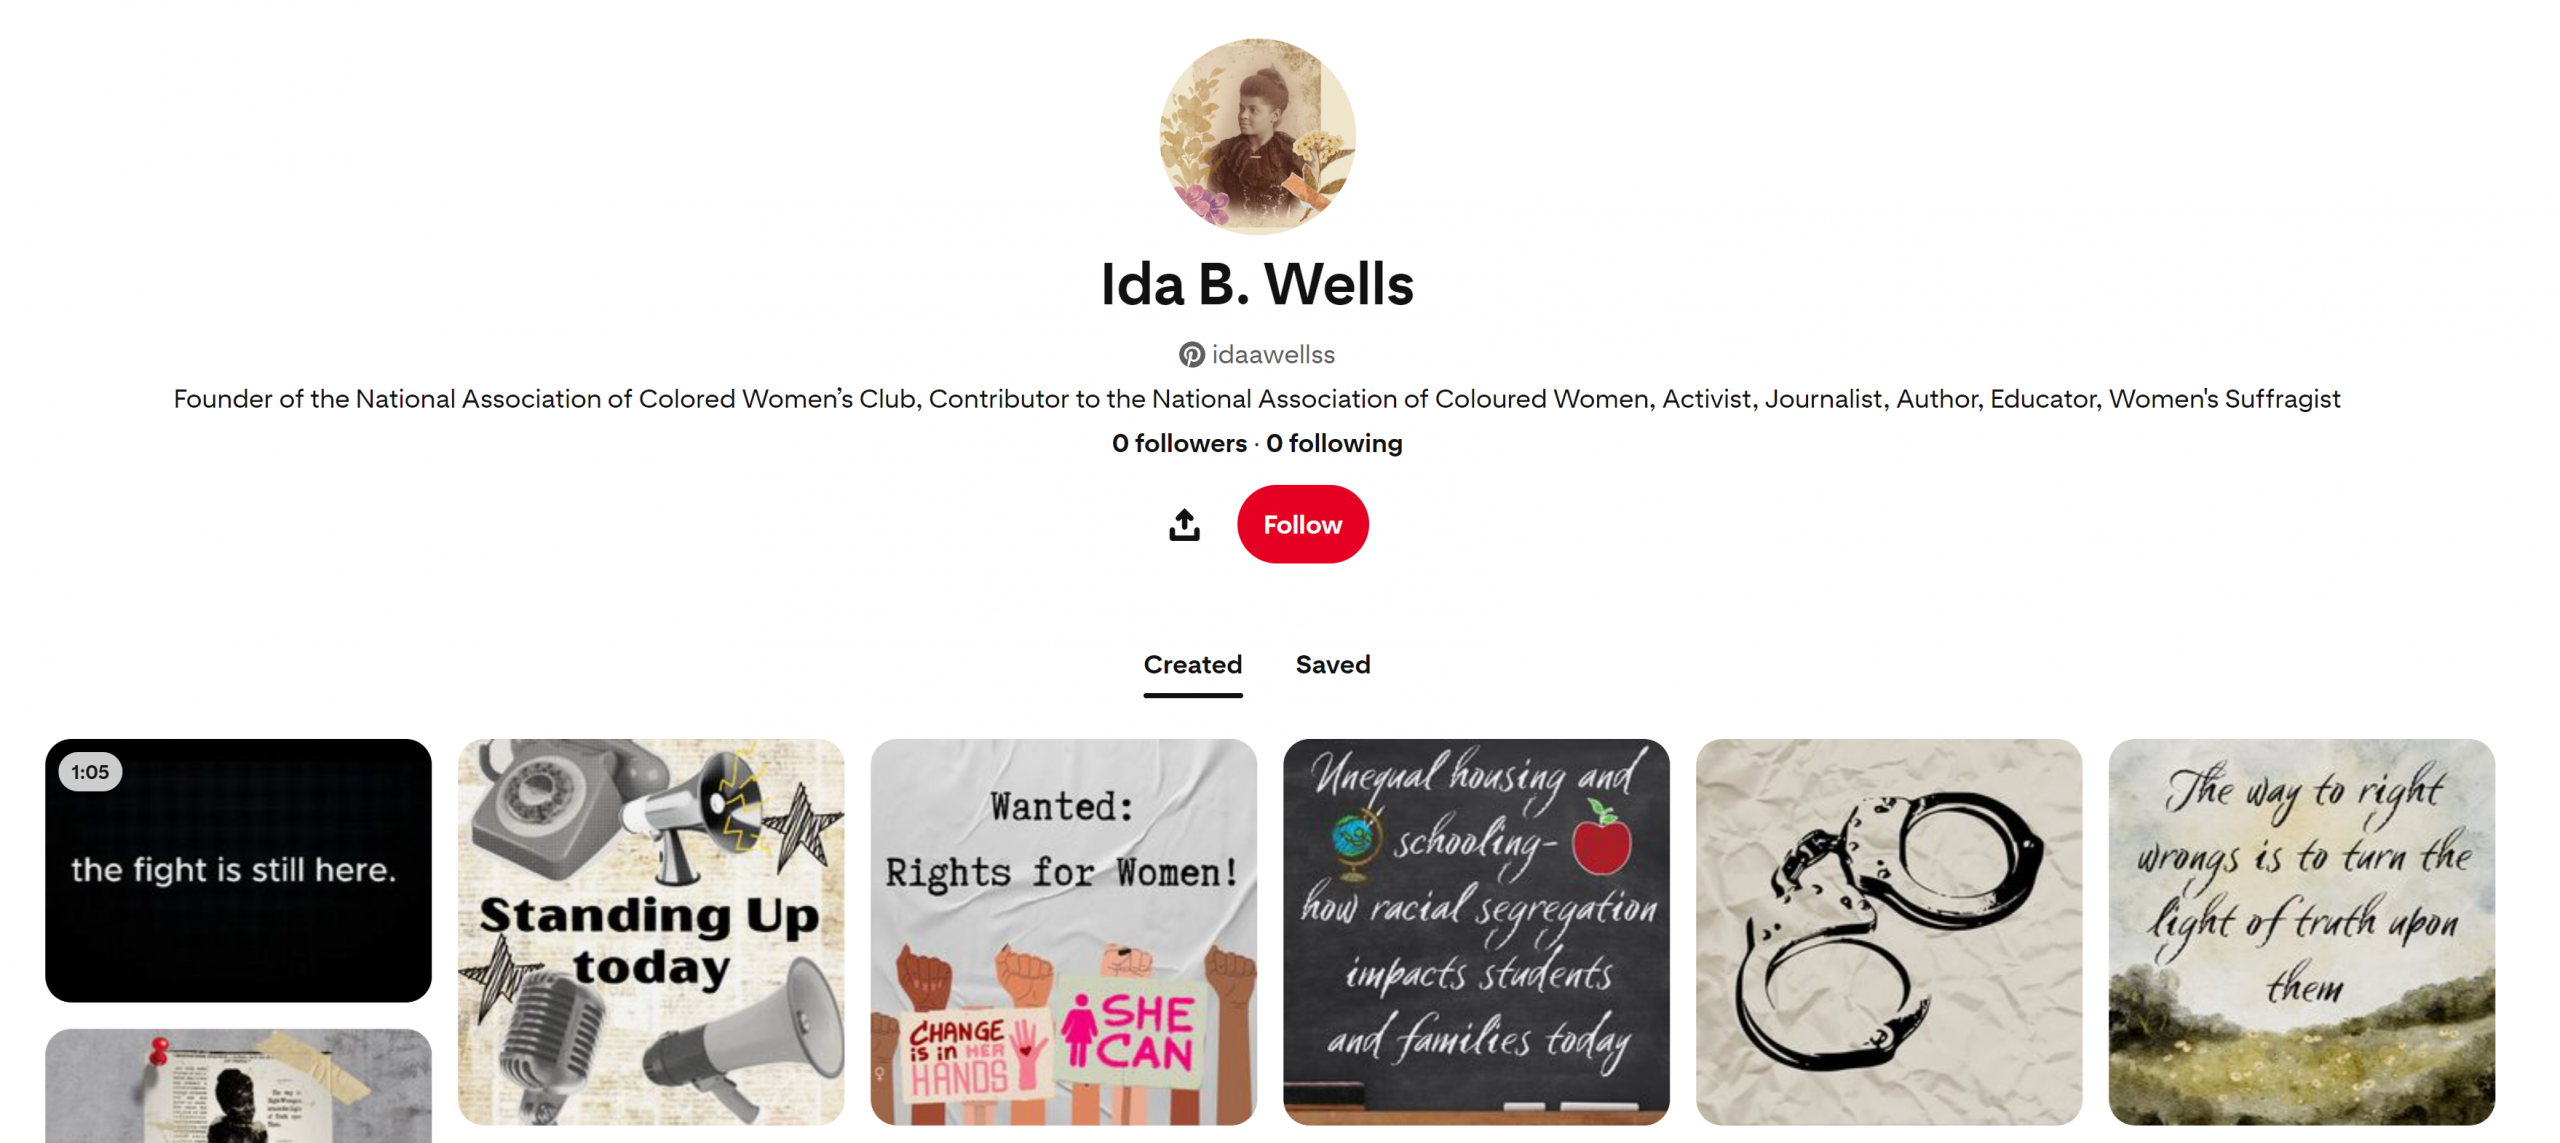 An image of a series of tiles on a Pinterest board for Ida B. Wells